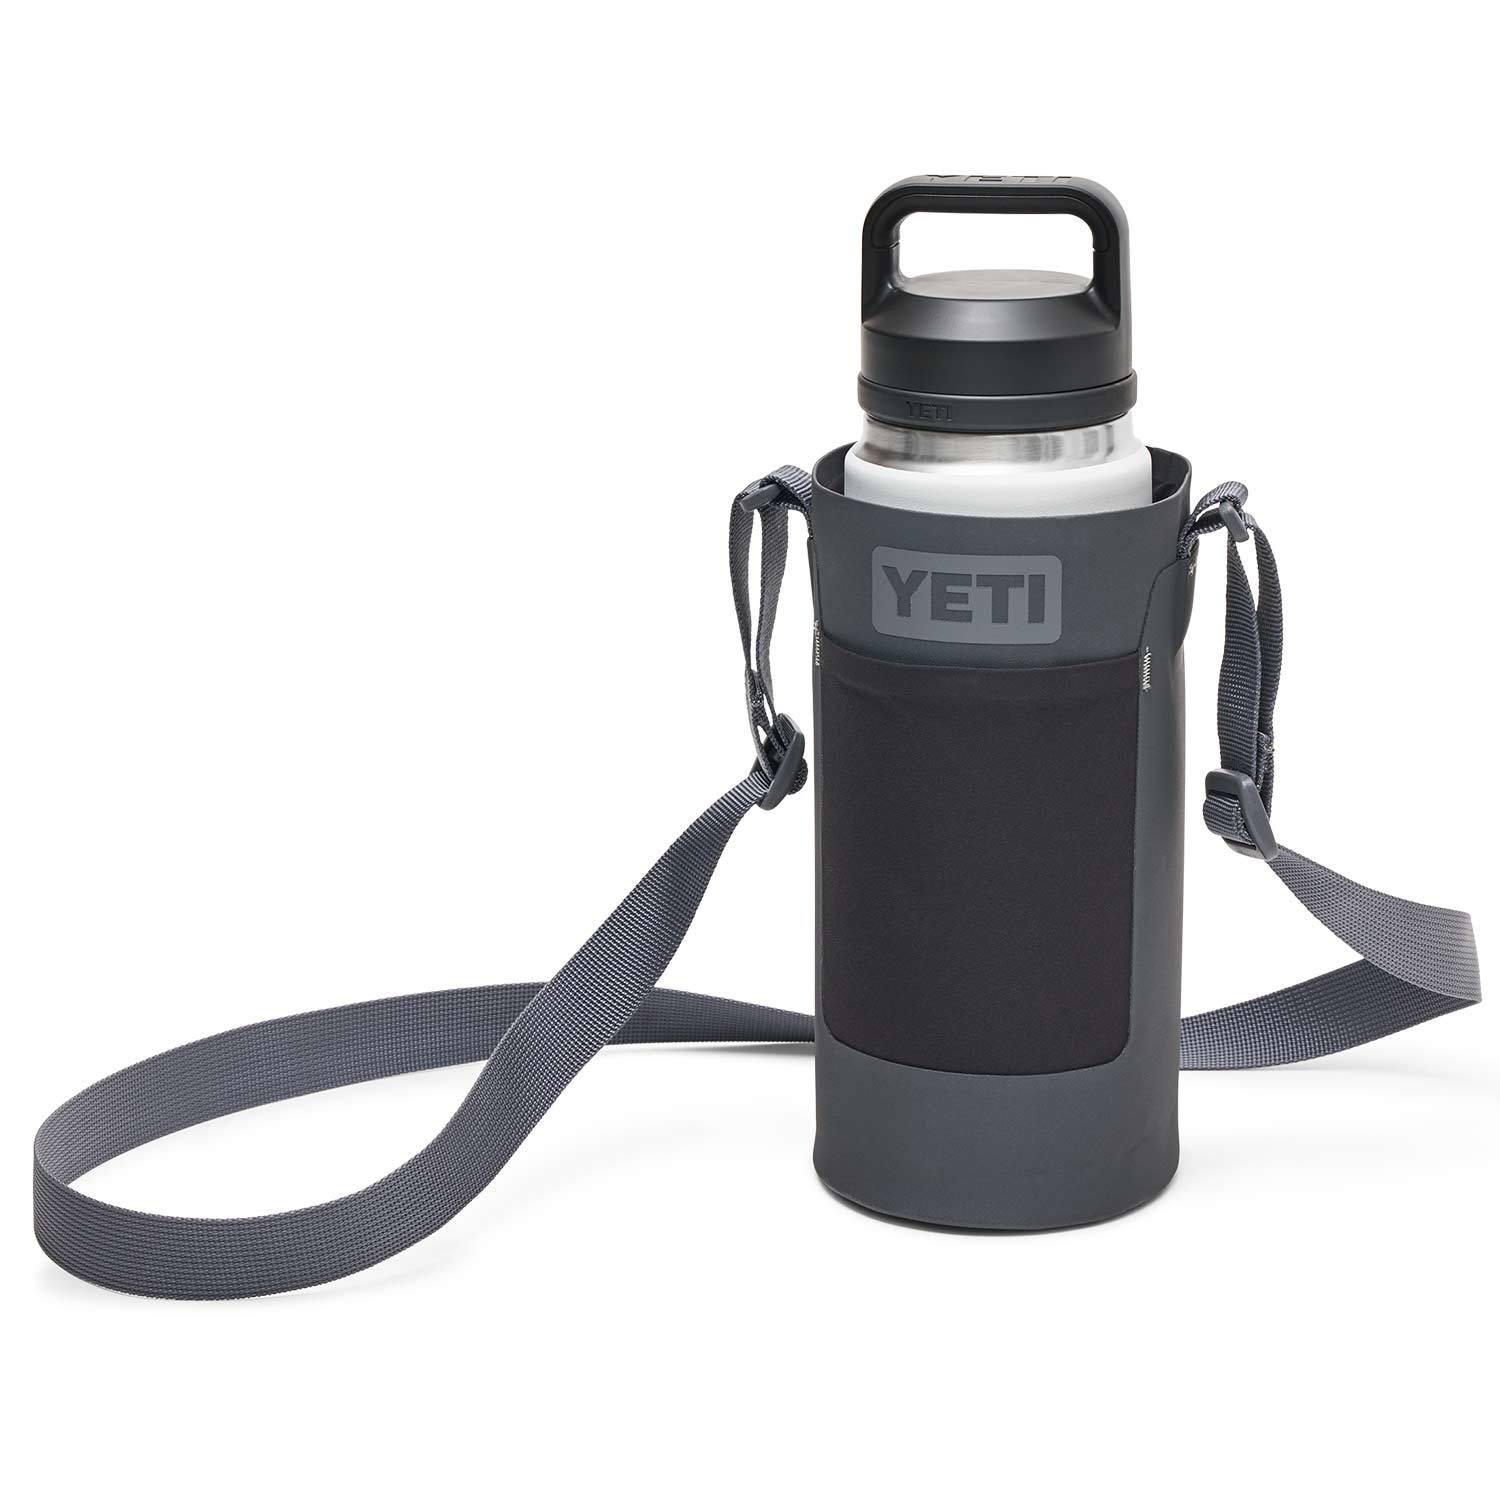 YETI - The Rambler Bottle Sling. Now available in two